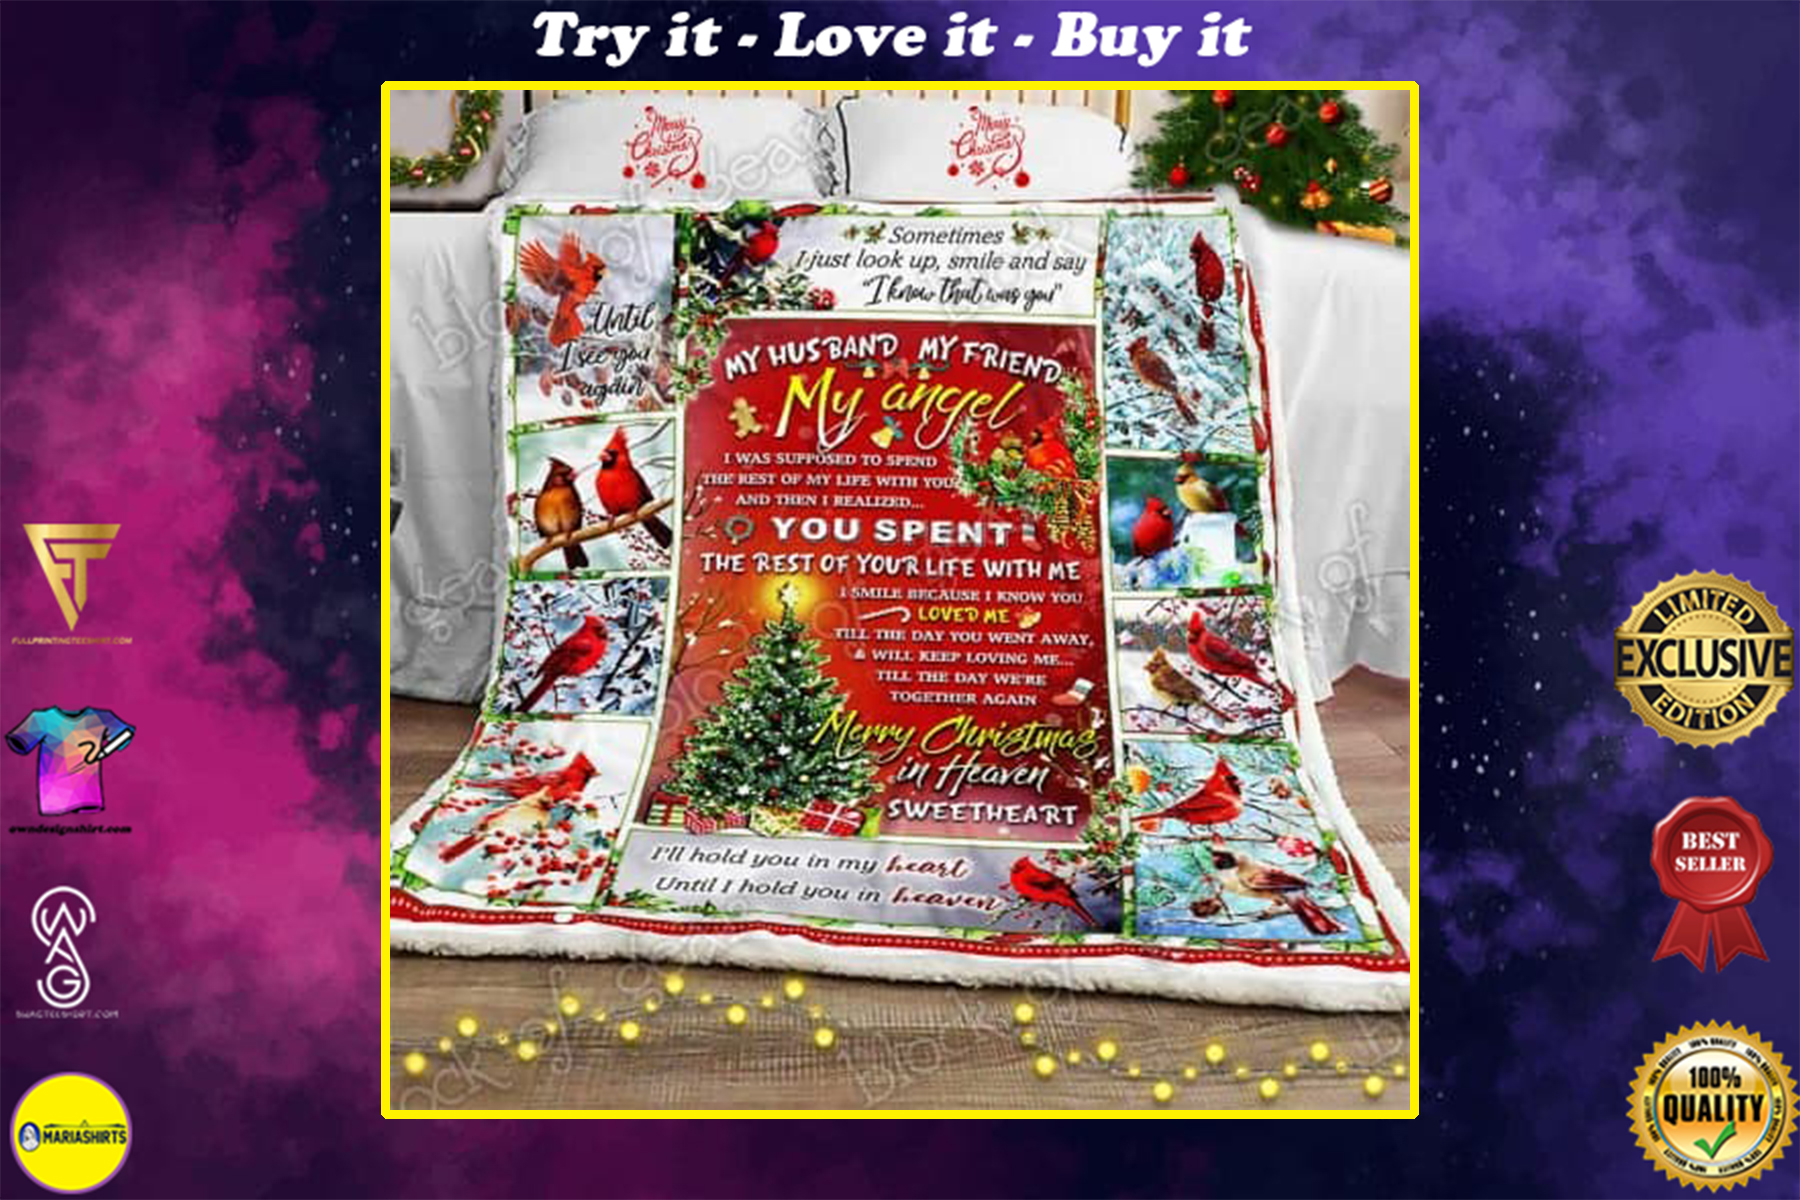 [special edition] my husband my friend my angel merry christmas in heaven sweetheart blanket – maria